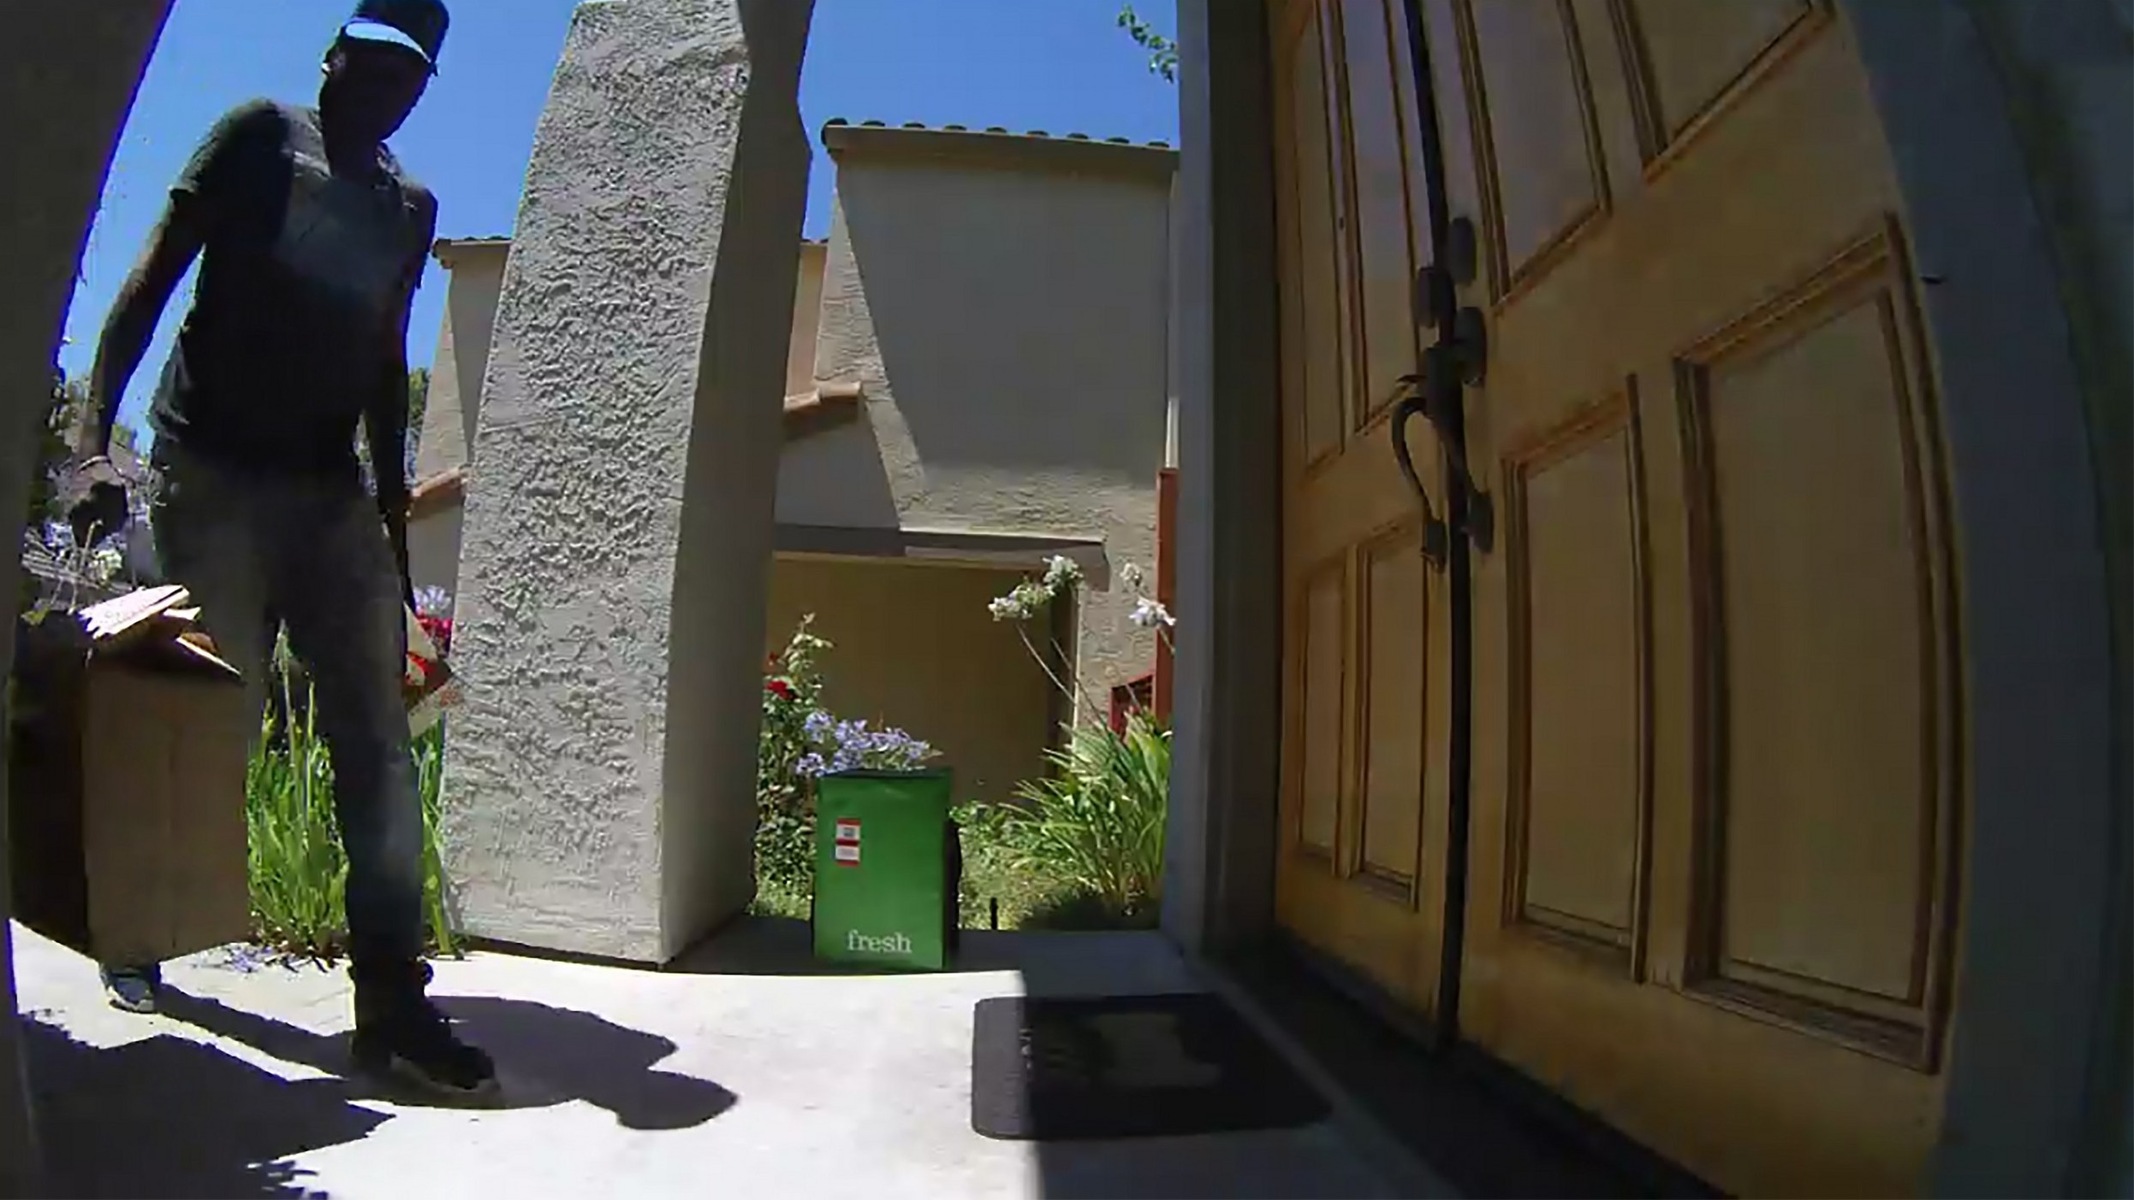 amazon delivery driver dropping 1 1